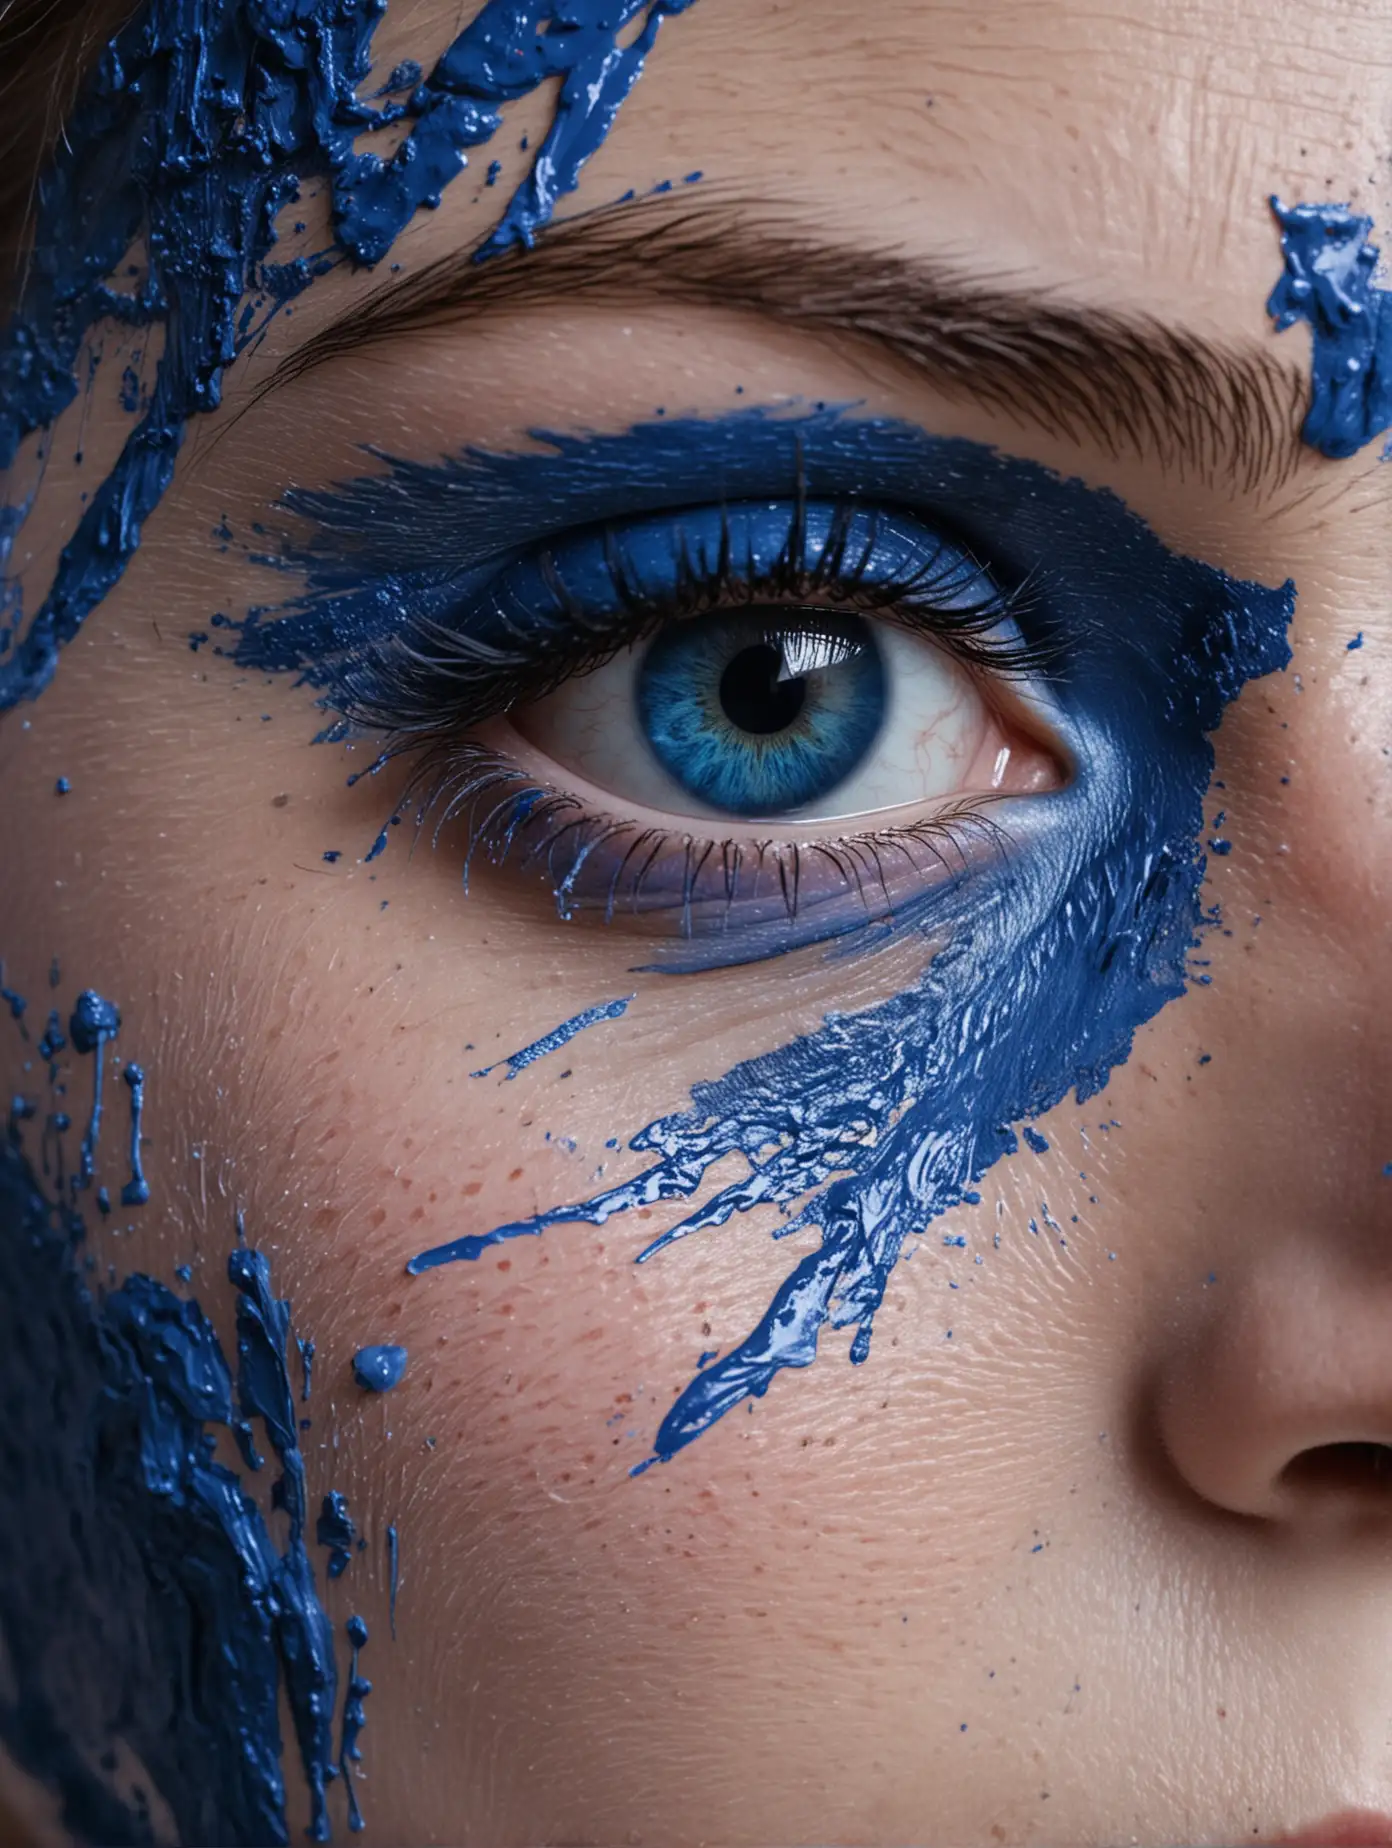 an artists photo a close up of a woman's eye face covered in blue paint